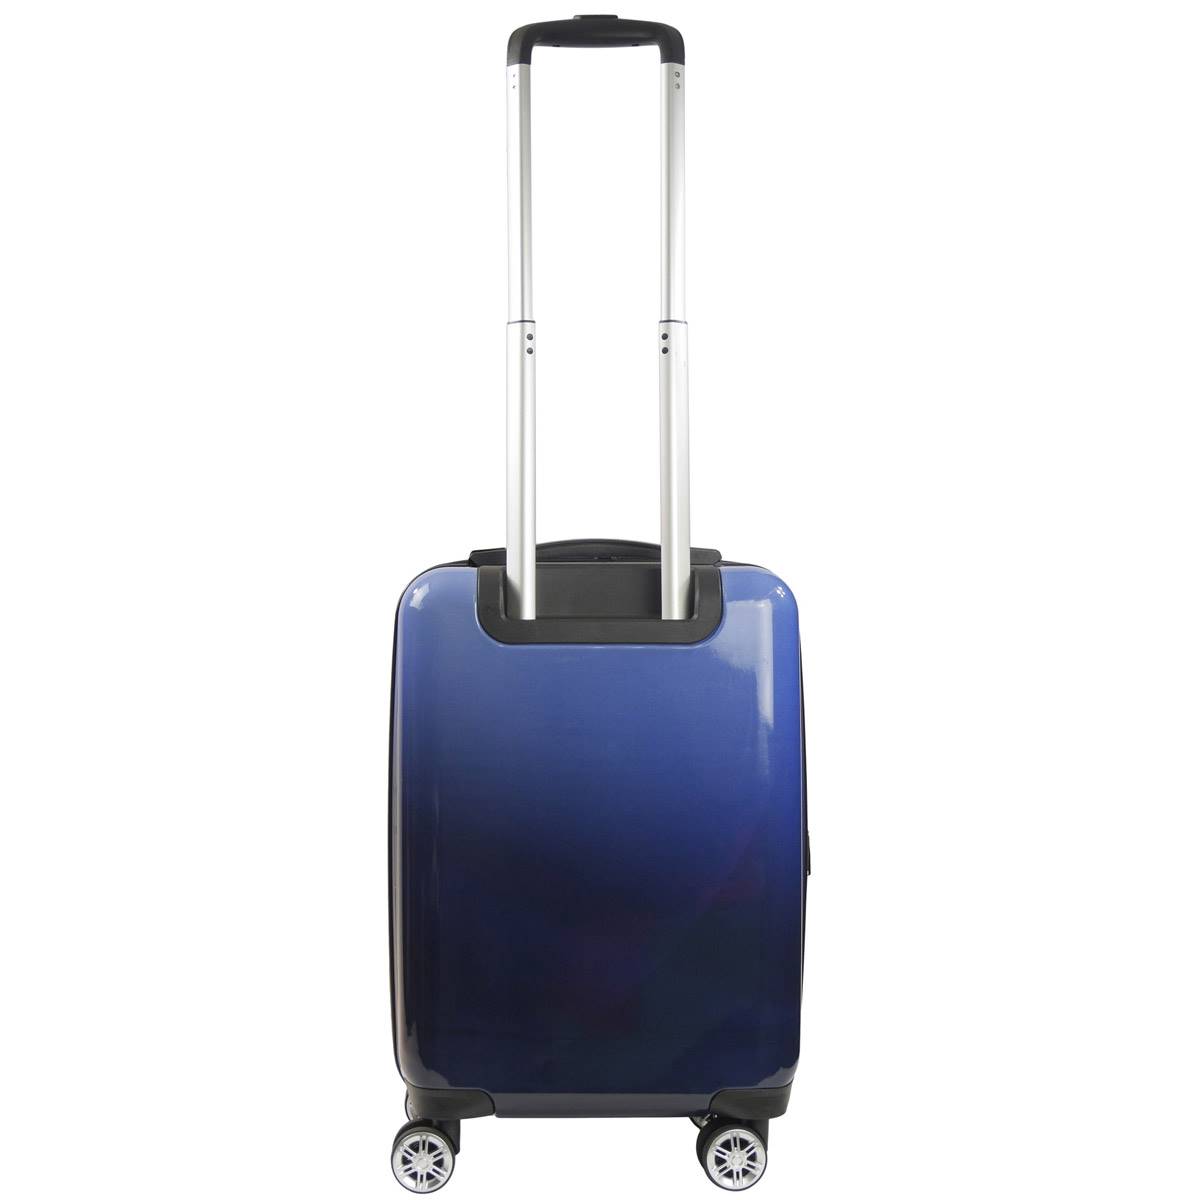 FUL 22in. Impulse Ombre Hardside Carry-On Spinner Luggage